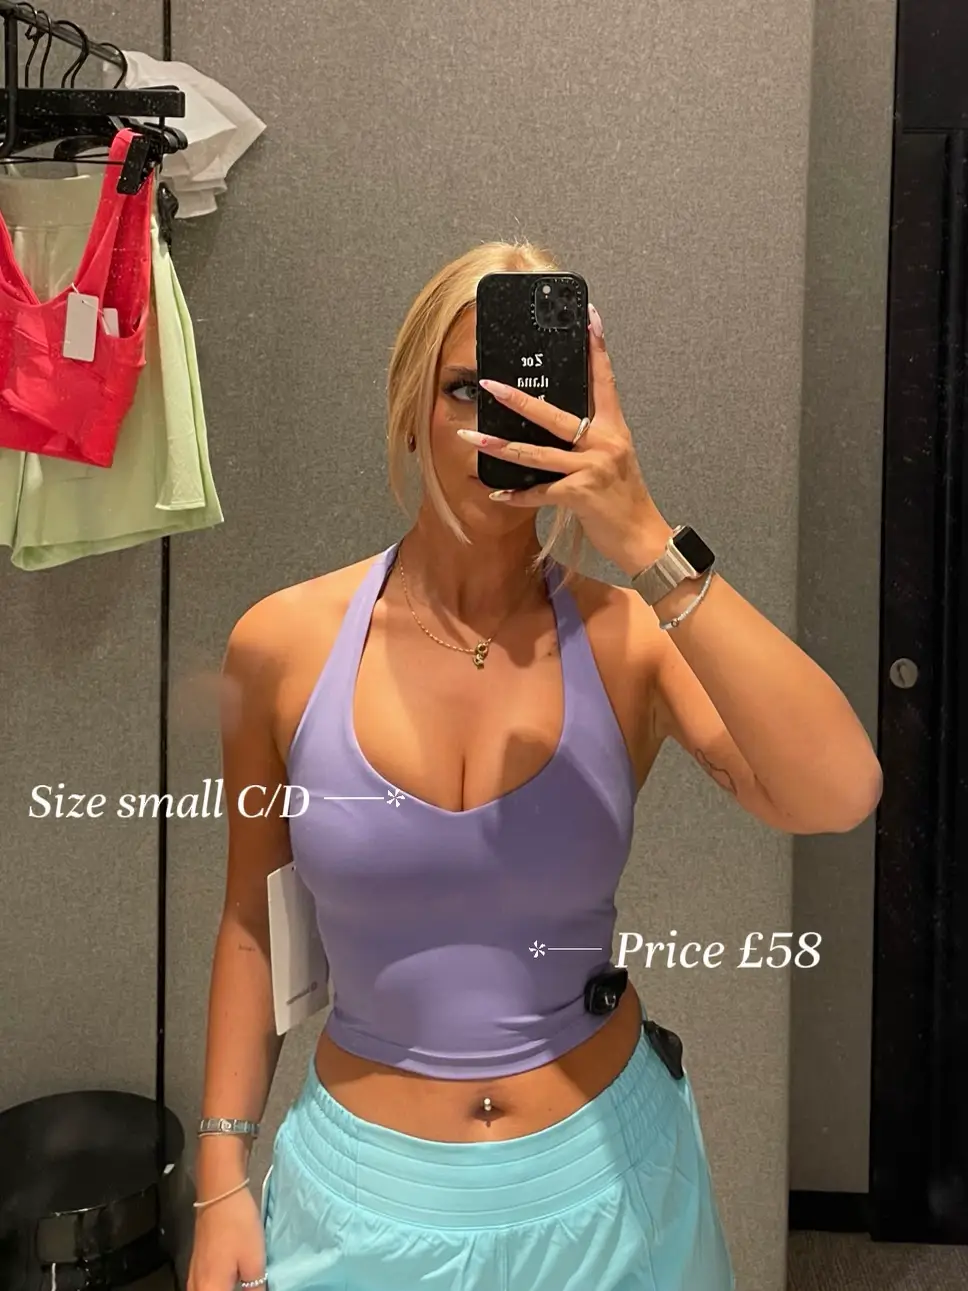 Wear It For Less - CRZ Yoga sports bras are on price drop! Other